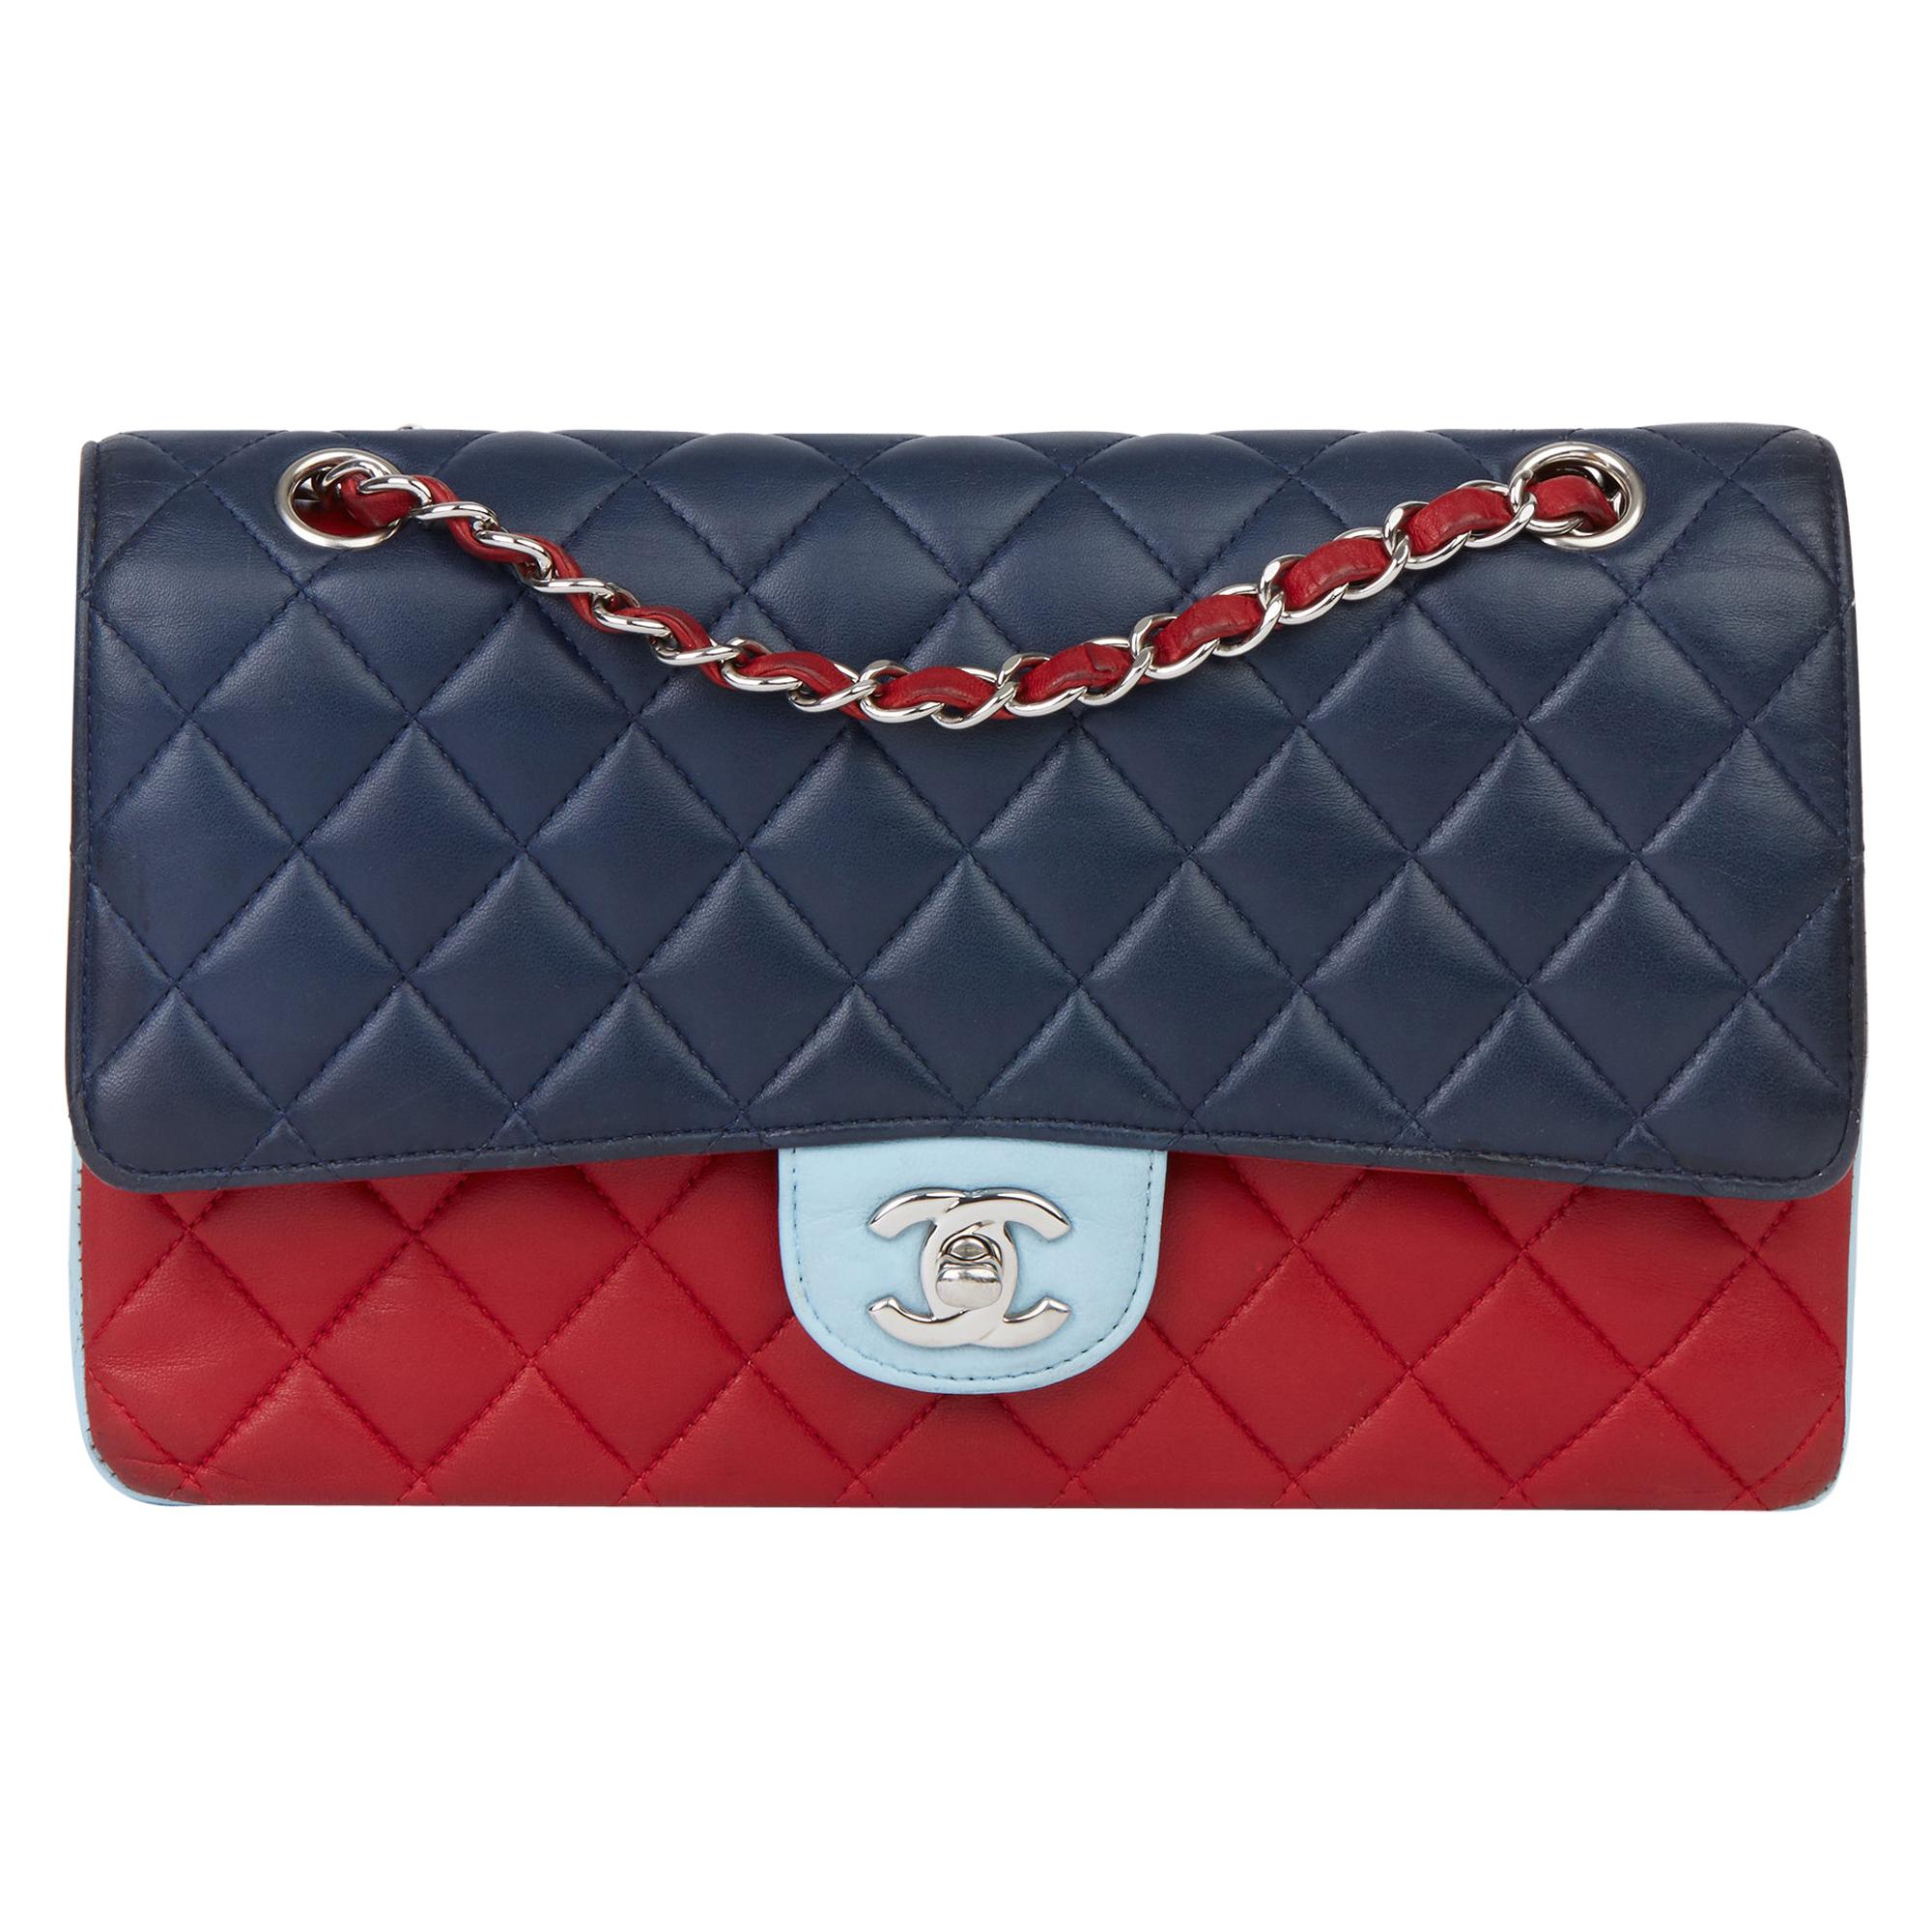 2016 Chanel Red, Navy and Light Blue Lambskin Medium Classic Double ...